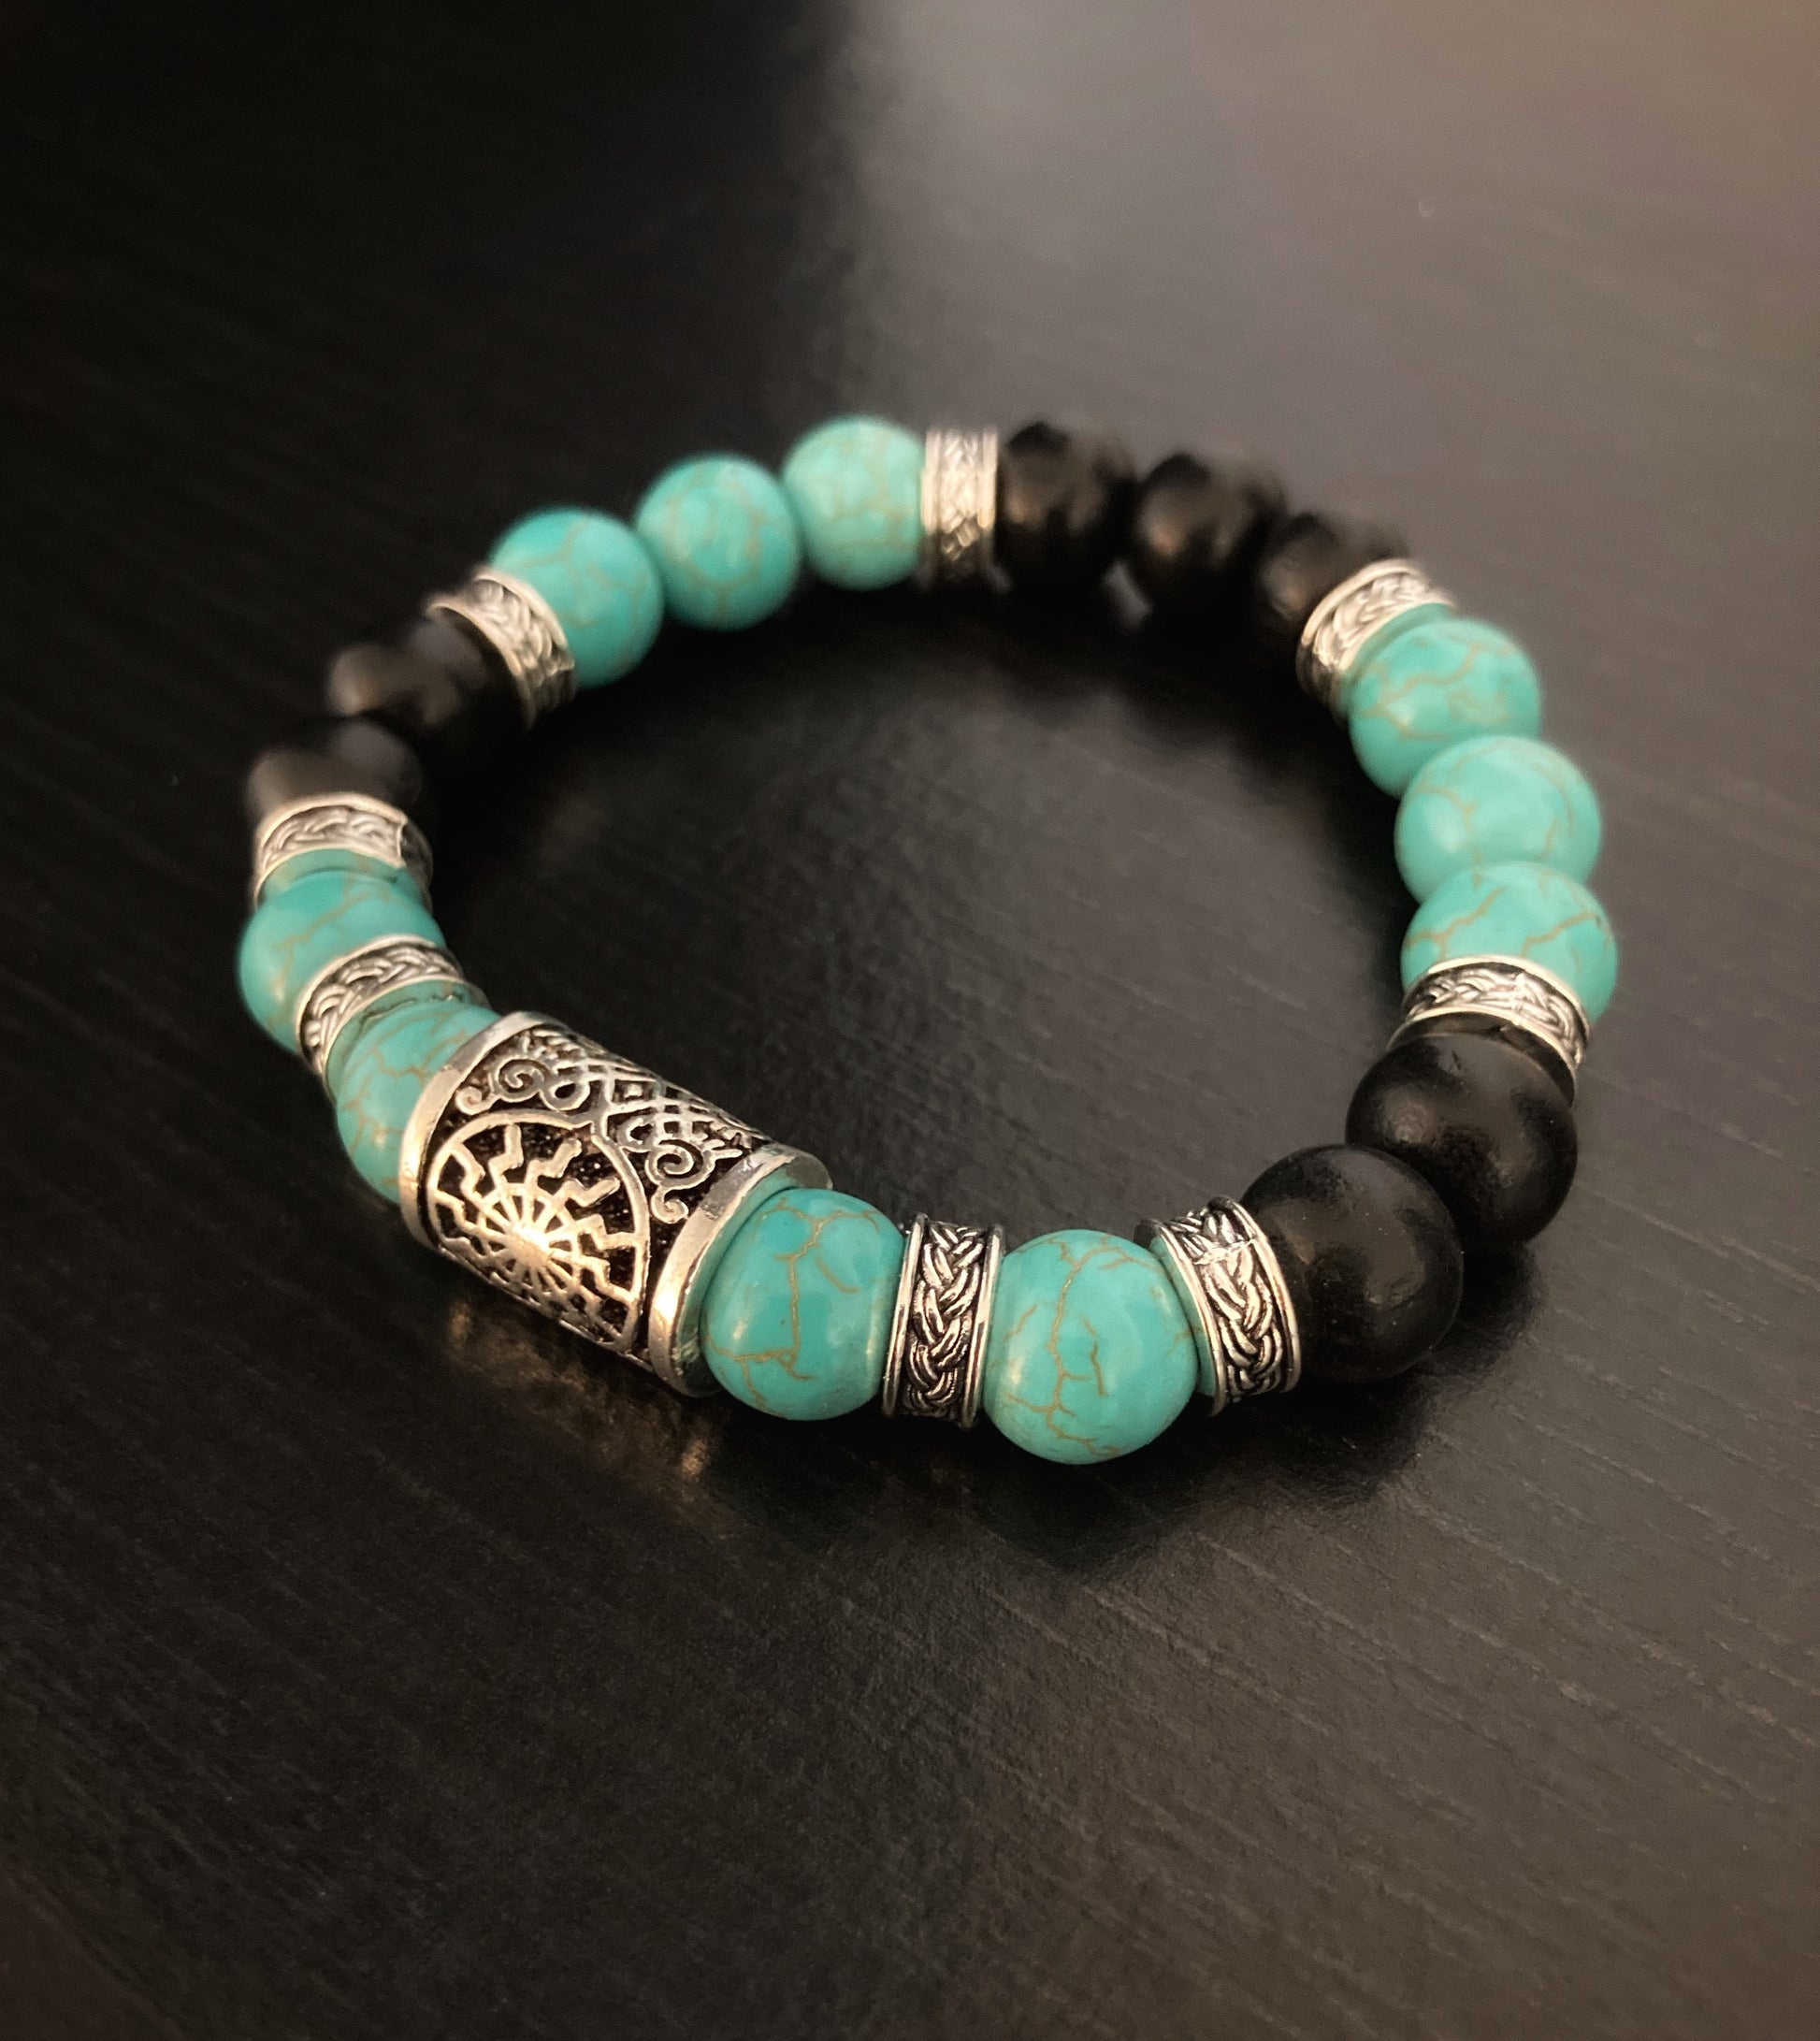 A turquiose and black beaded bracelet with a metal rune sits on a black surface. There are 7 of the black beads and 10 of the turquoise.